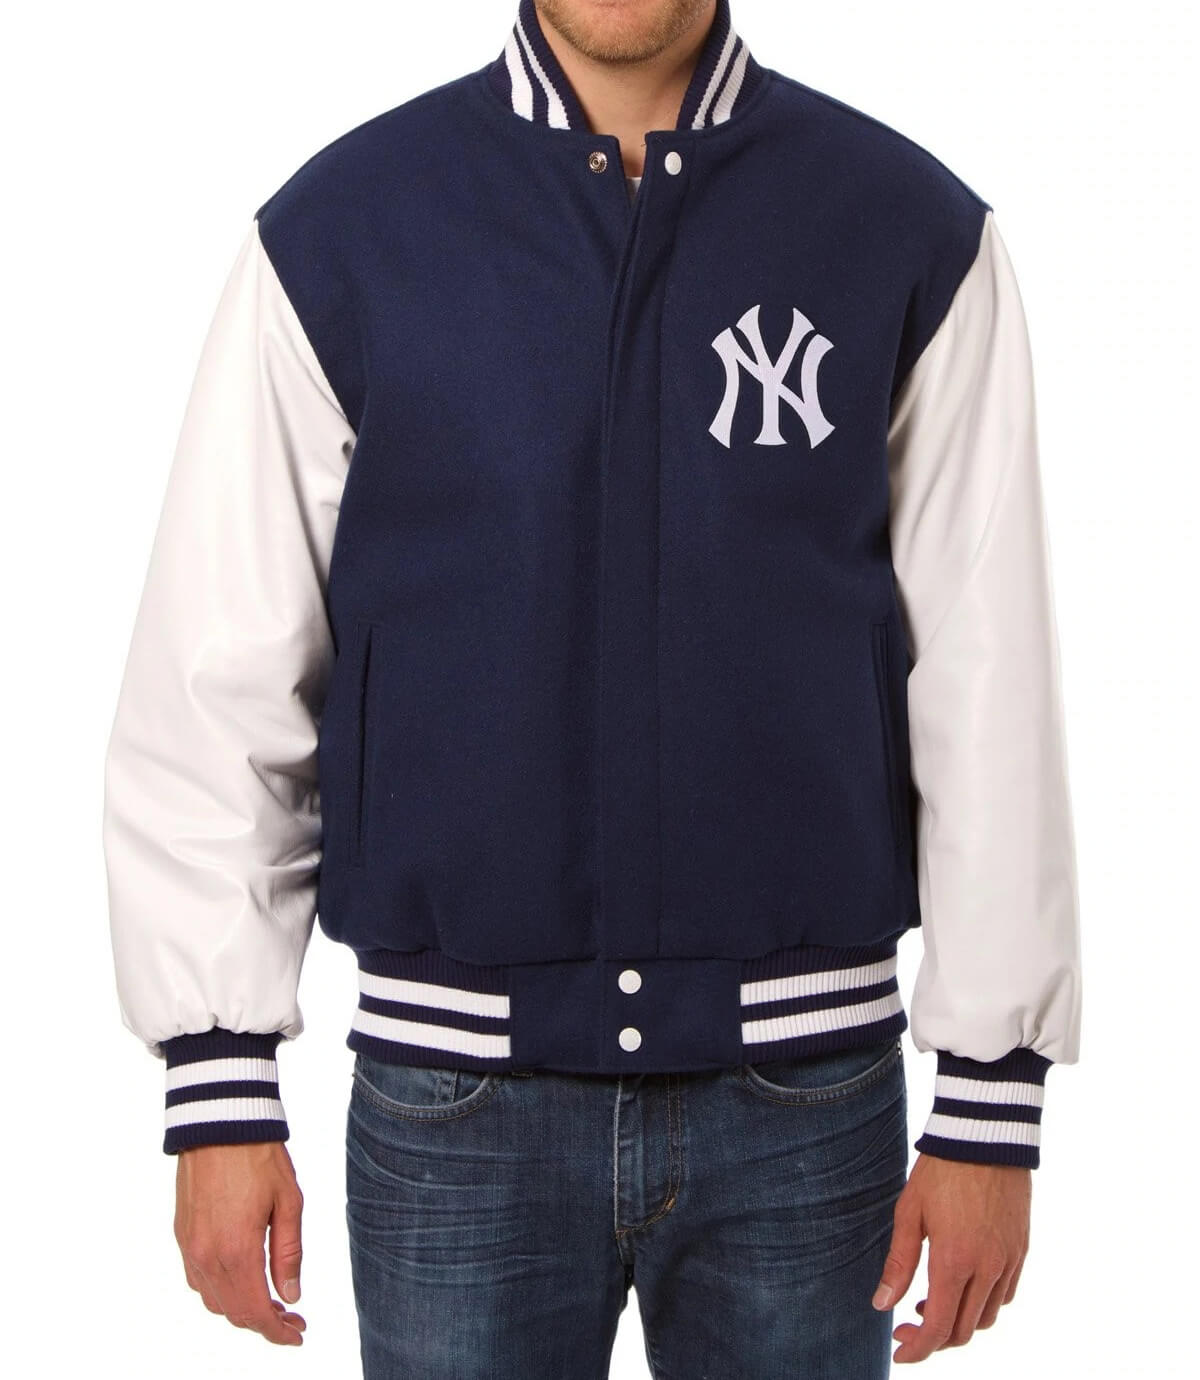 New York Yankees JH Design Reversible Fleece Jacket with Faux Leather  Sleeves - Navy